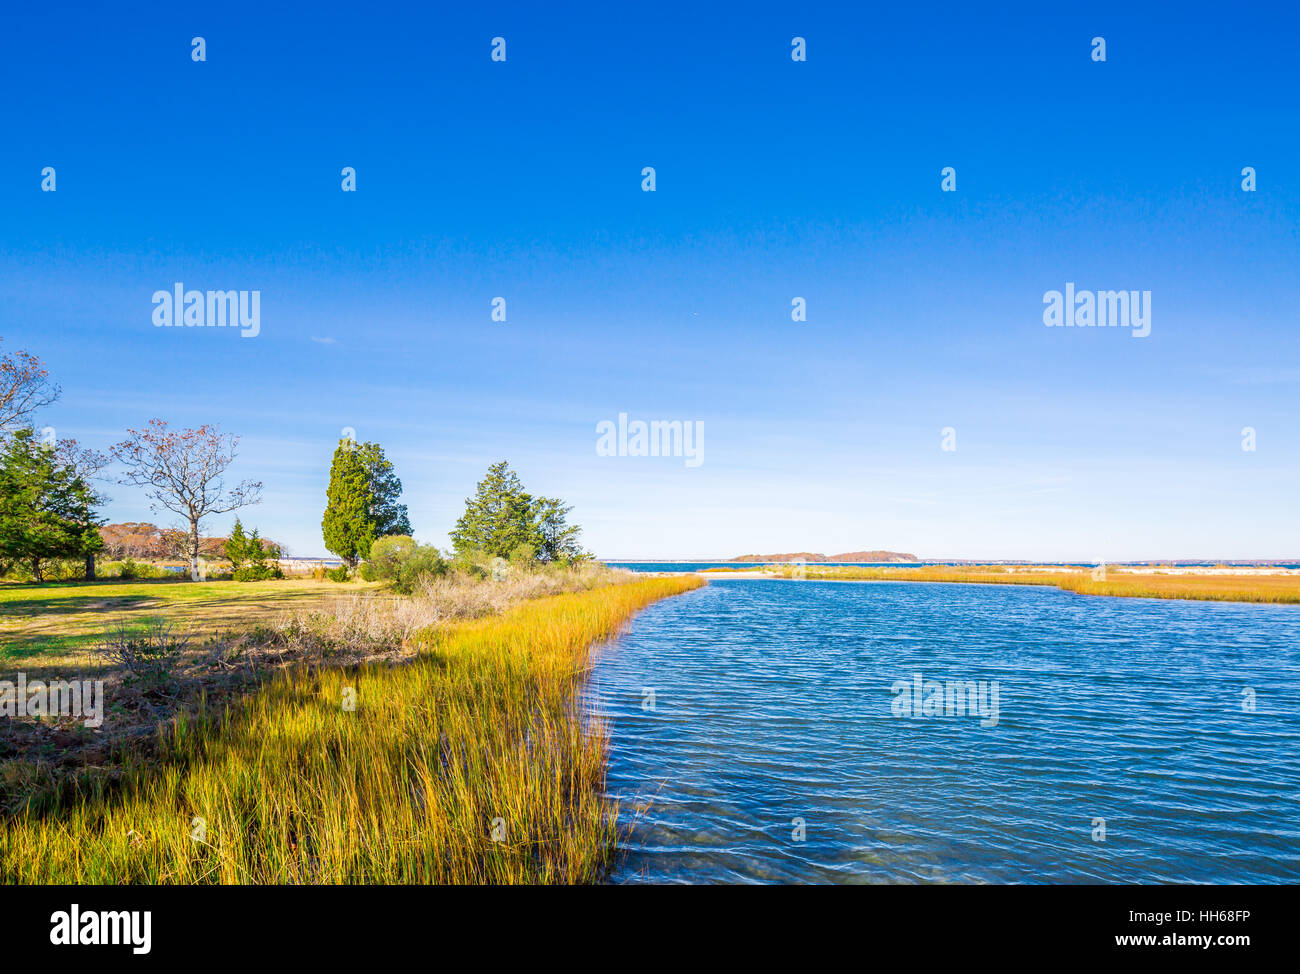 wetland and salt water in a calm bay Stock Photo